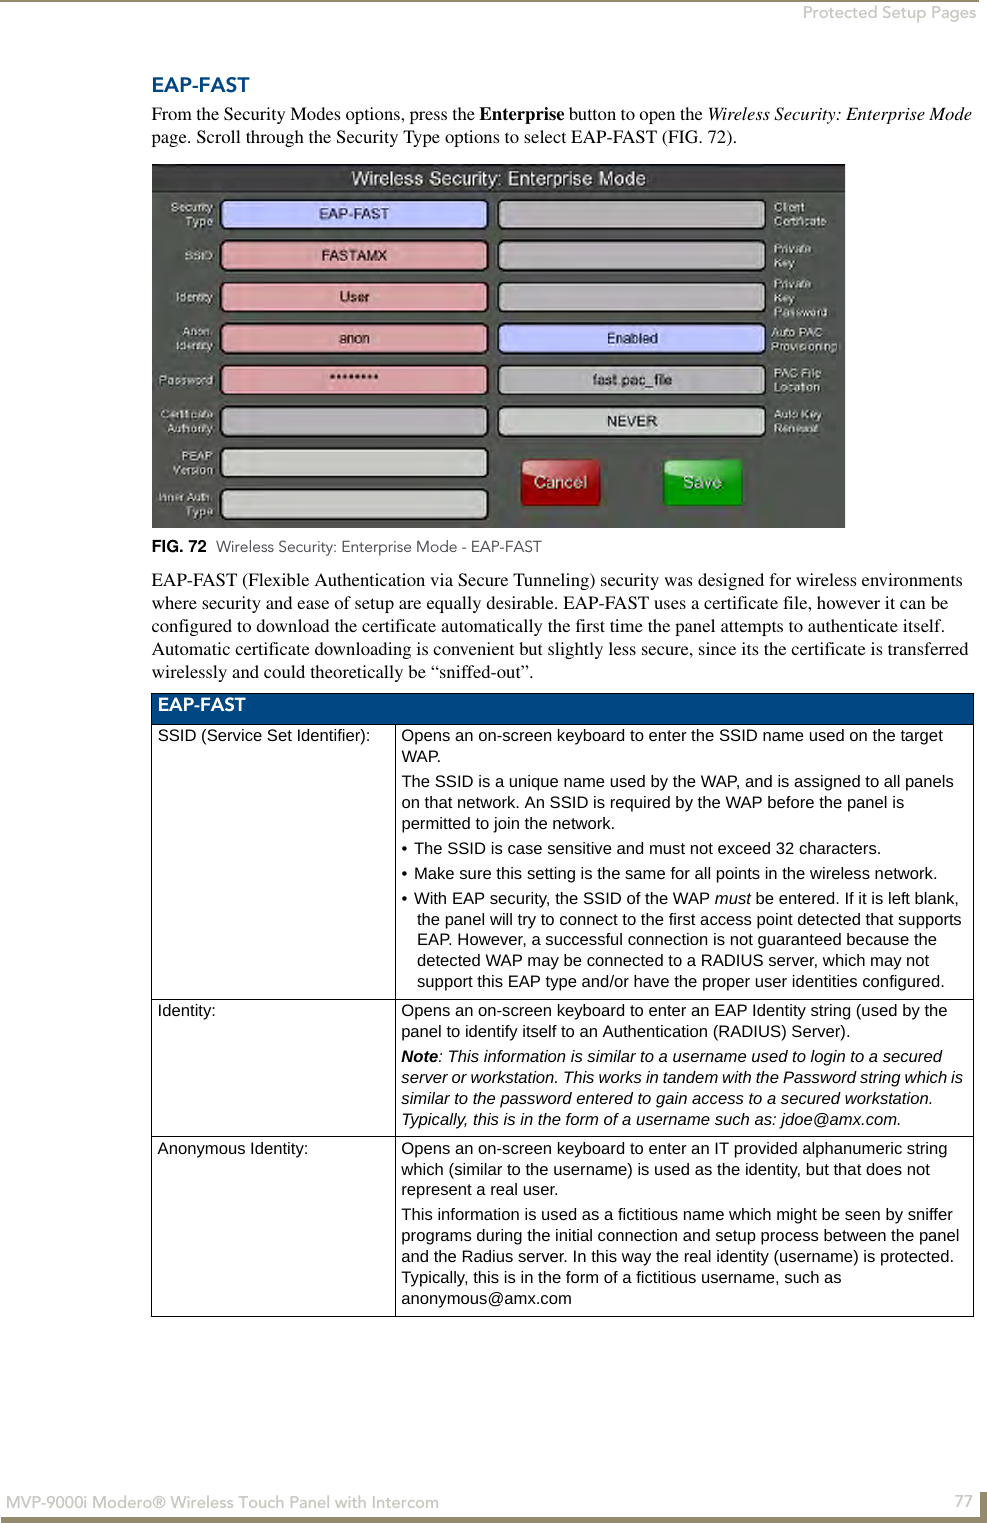 Protected Setup Pages77MVP-9000i Modero® Wireless Touch Panel with IntercomEAP-FASTFrom the Security Modes options, press the Enterprise button to open the Wireless Security: Enterprise Mode page. Scroll through the Security Type options to select EAP-FAST (FIG. 72).    EAP-FAST (Flexible Authentication via Secure Tunneling) security was designed for wireless environments where security and ease of setup are equally desirable. EAP-FAST uses a certificate file, however it can be configured to download the certificate automatically the first time the panel attempts to authenticate itself. Automatic certificate downloading is convenient but slightly less secure, since its the certificate is transferred wirelessly and could theoretically be “sniffed-out”. FIG. 72  Wireless Security: Enterprise Mode - EAP-FASTEAP-FASTSSID (Service Set Identifier): Opens an on-screen keyboard to enter the SSID name used on the target WAP. The SSID is a unique name used by the WAP, and is assigned to all panels on that network. An SSID is required by the WAP before the panel is permitted to join the network. • The SSID is case sensitive and must not exceed 32 characters. • Make sure this setting is the same for all points in the wireless network.• With EAP security, the SSID of the WAP must be entered. If it is left blank, the panel will try to connect to the first access point detected that supports EAP. However, a successful connection is not guaranteed because the detected WAP may be connected to a RADIUS server, which may not support this EAP type and/or have the proper user identities configured.Identity: Opens an on-screen keyboard to enter an EAP Identity string (used by the panel to identify itself to an Authentication (RADIUS) Server). Note: This information is similar to a username used to login to a secured server or workstation. This works in tandem with the Password string which is similar to the password entered to gain access to a secured workstation. Typically, this is in the form of a username such as: jdoe@amx.com.Anonymous Identity: Opens an on-screen keyboard to enter an IT provided alphanumeric string which (similar to the username) is used as the identity, but that does not represent a real user. This information is used as a fictitious name which might be seen by sniffer programs during the initial connection and setup process between the panel and the Radius server. In this way the real identity (username) is protected. Typically, this is in the form of a fictitious username, such as anonymous@amx.com